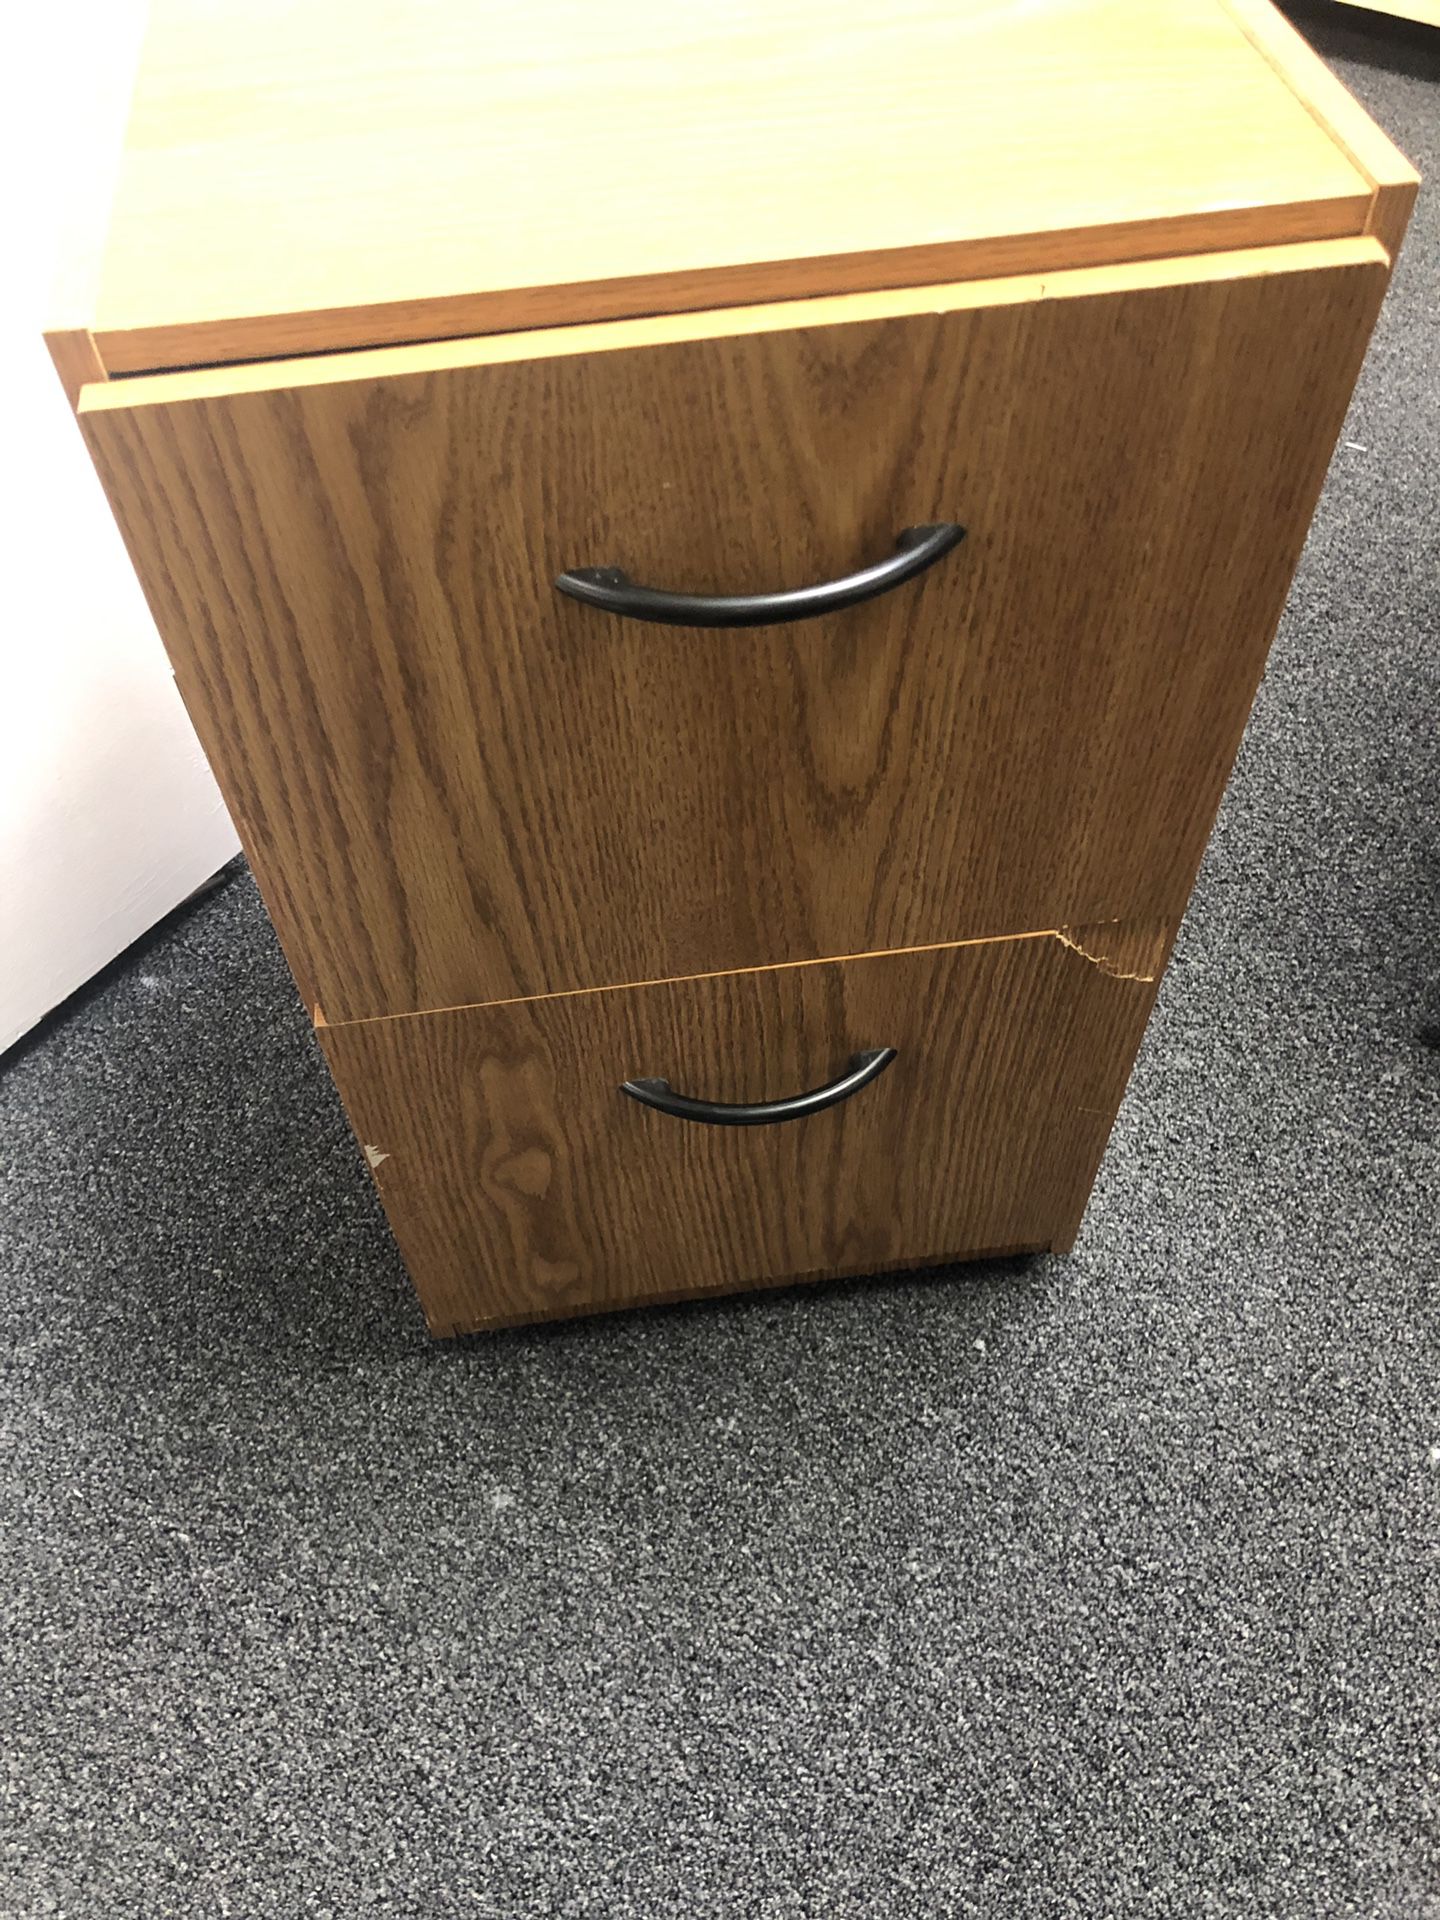 2 Drawer Wood Filing Cabinet with little damage